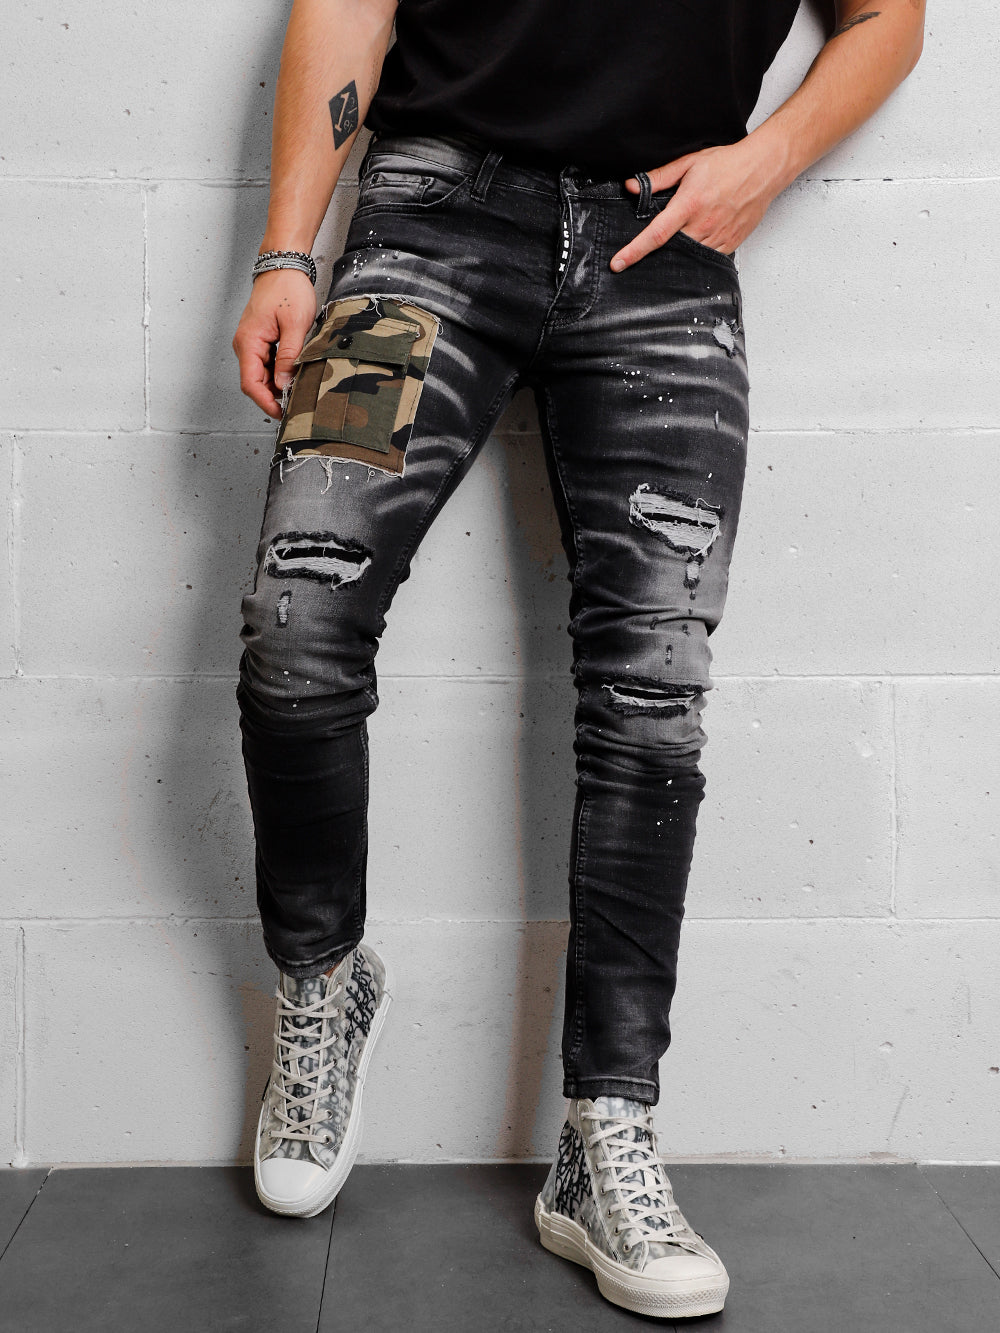 A man in a CAMOUFLAGE | BLACK t - shirt and jeans leaning against a wall.